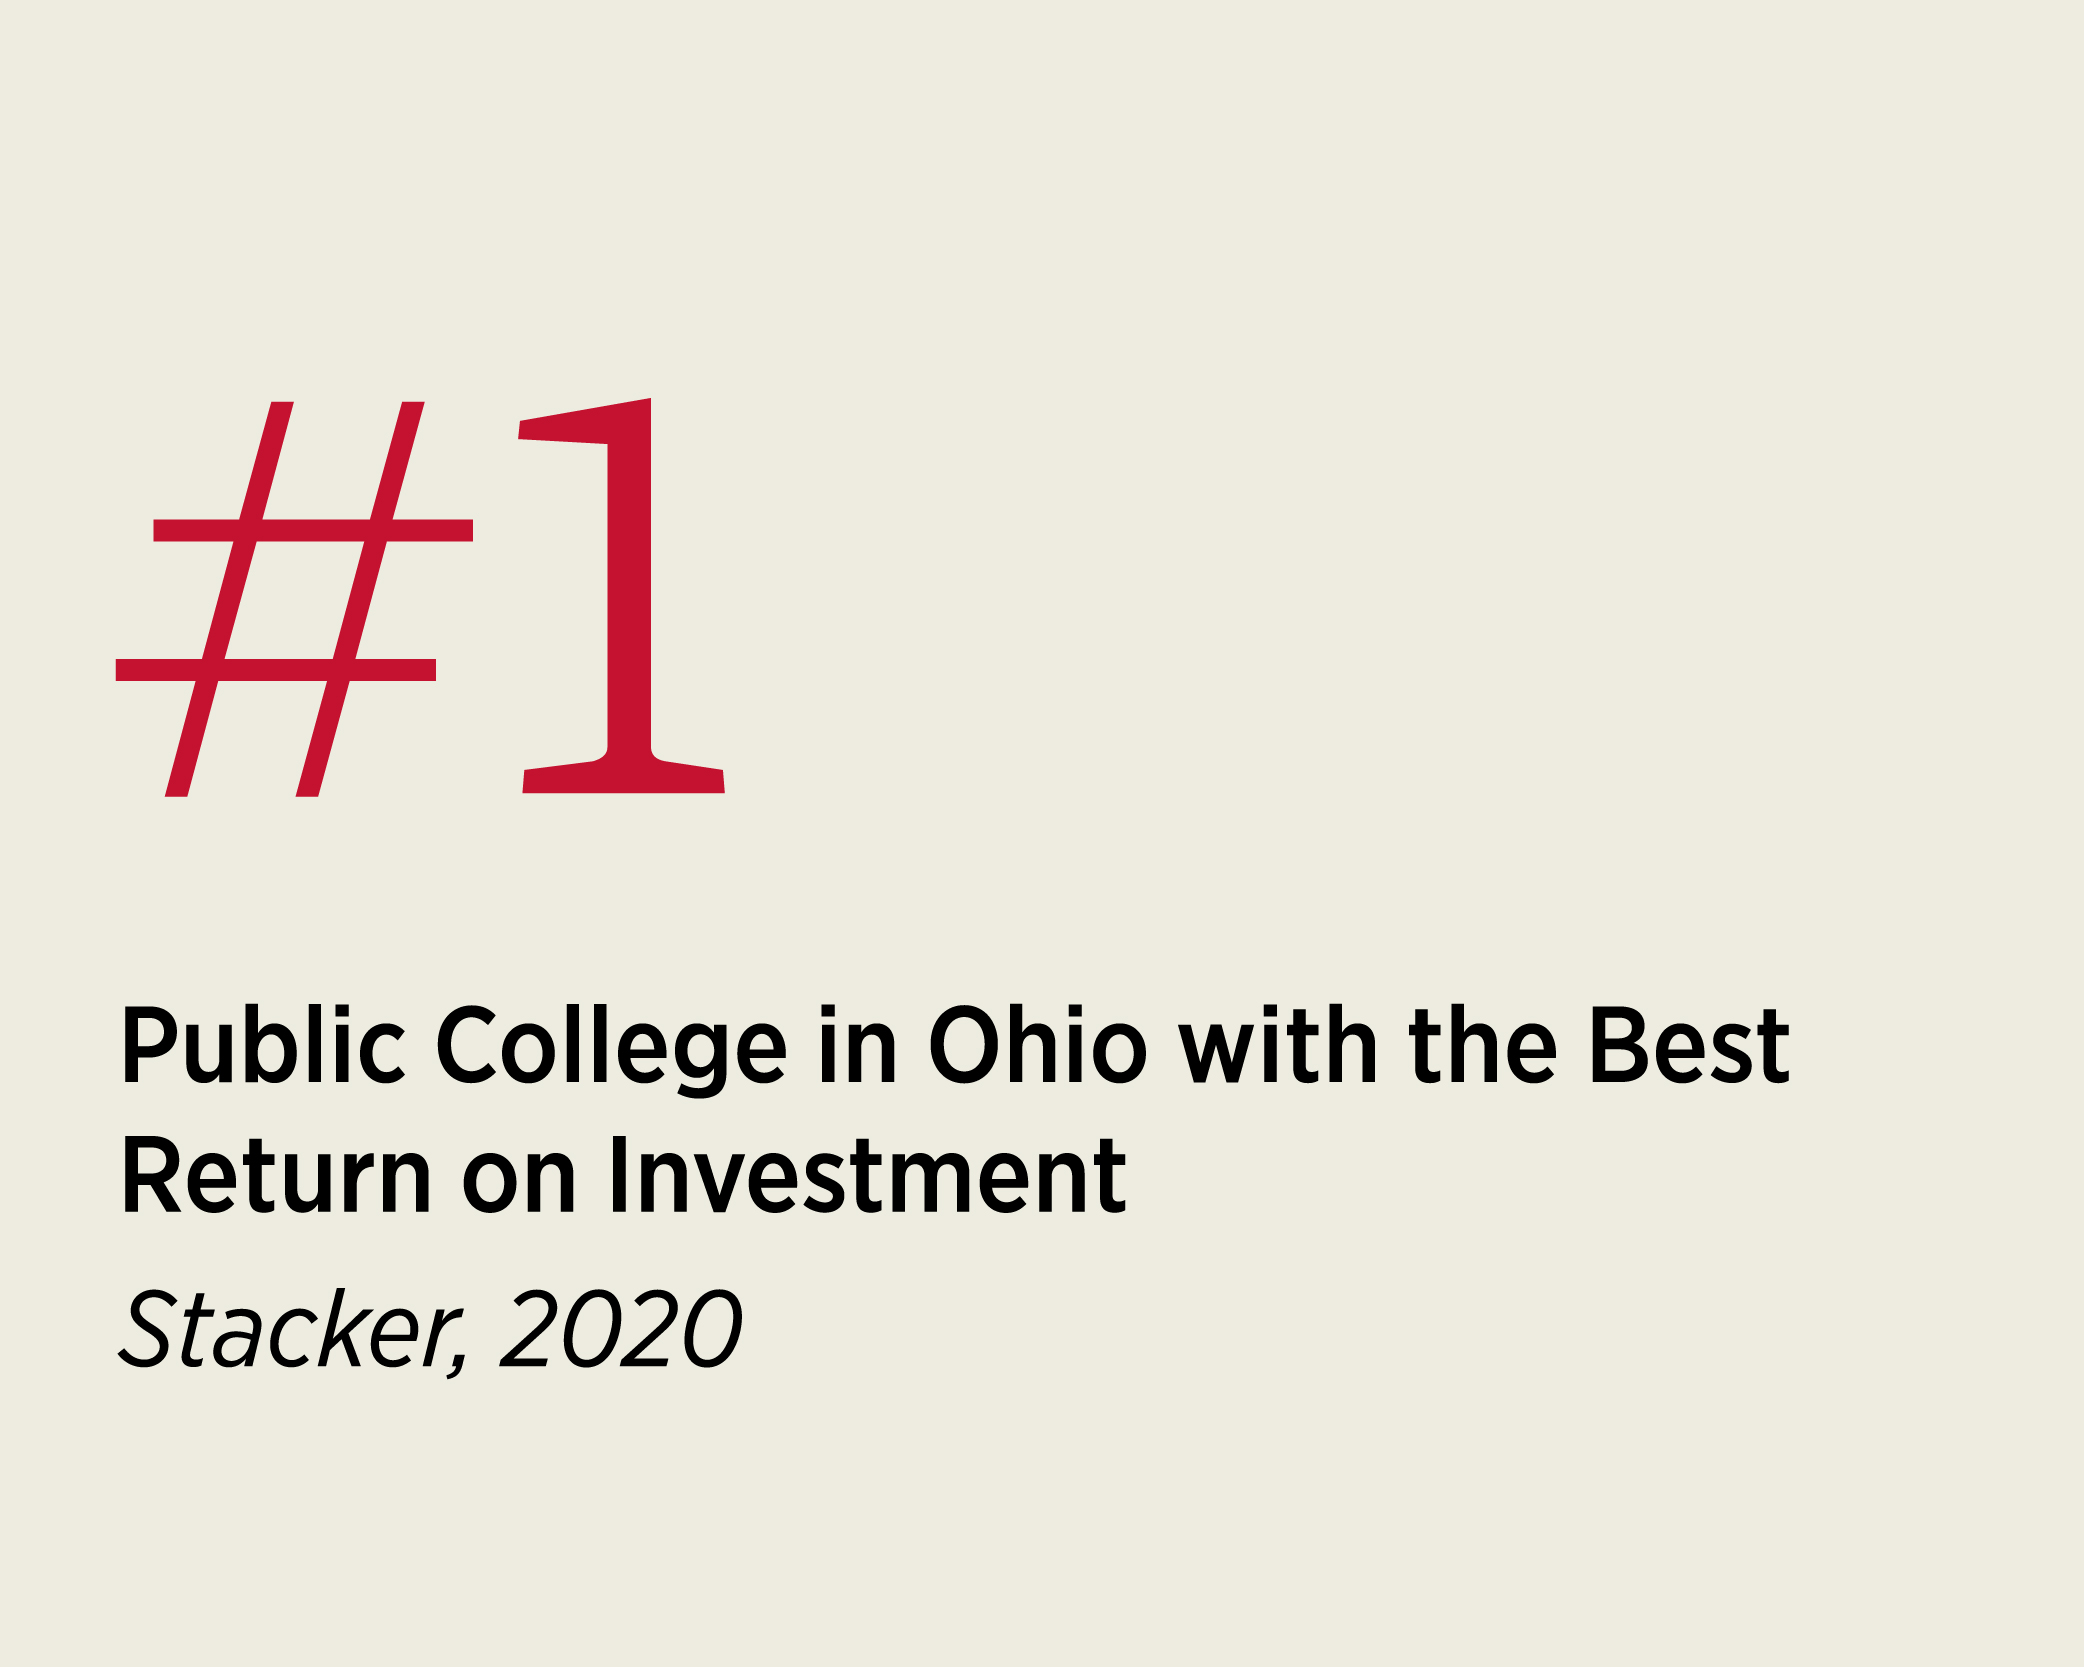 #1 Public College in Ohio with the Best Return on Investment Stacker, 2020